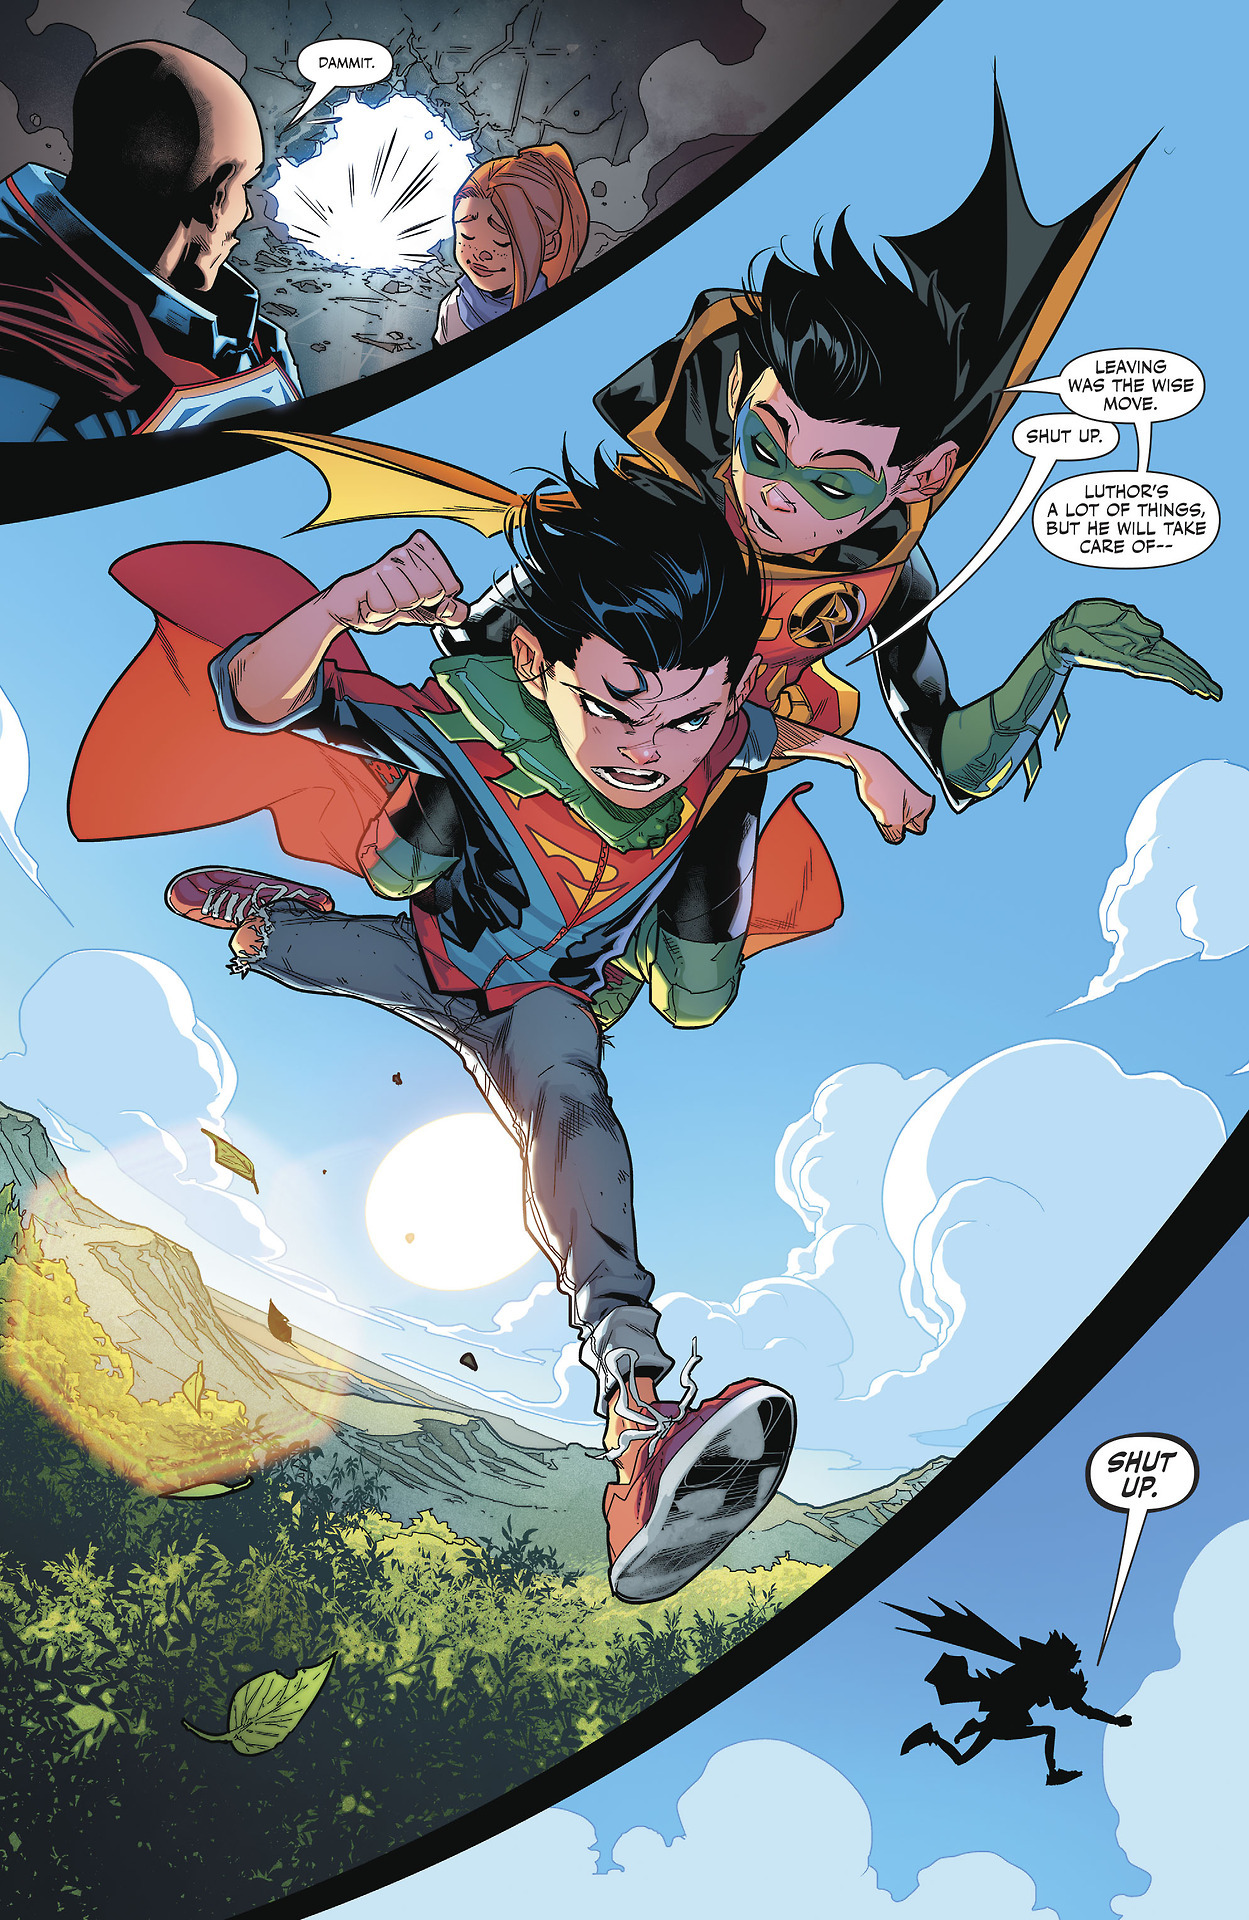 “Rest assured, you will never find me piggybacking on your narrow shoulders.”-Damian